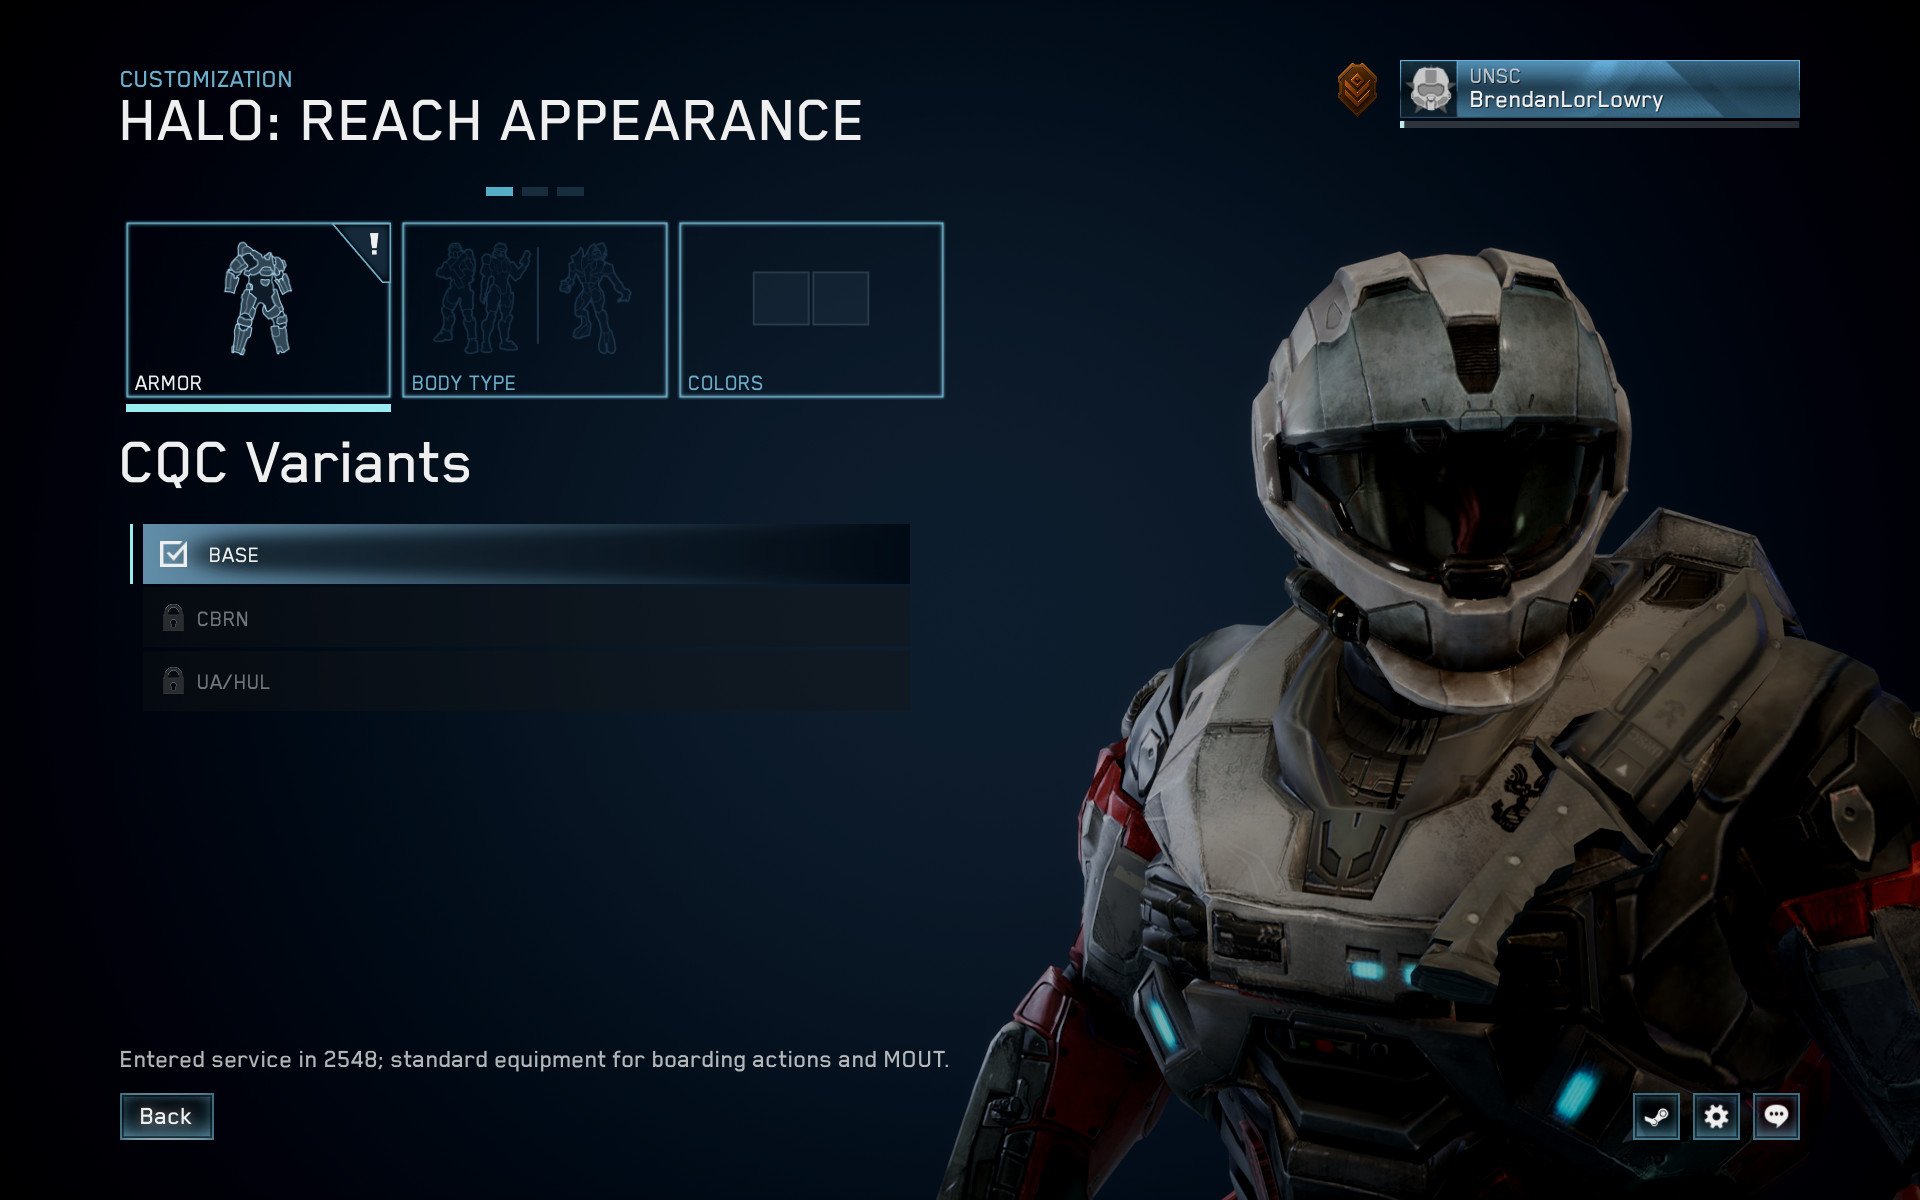 One of the customization menus in Halo: Reach on PC.